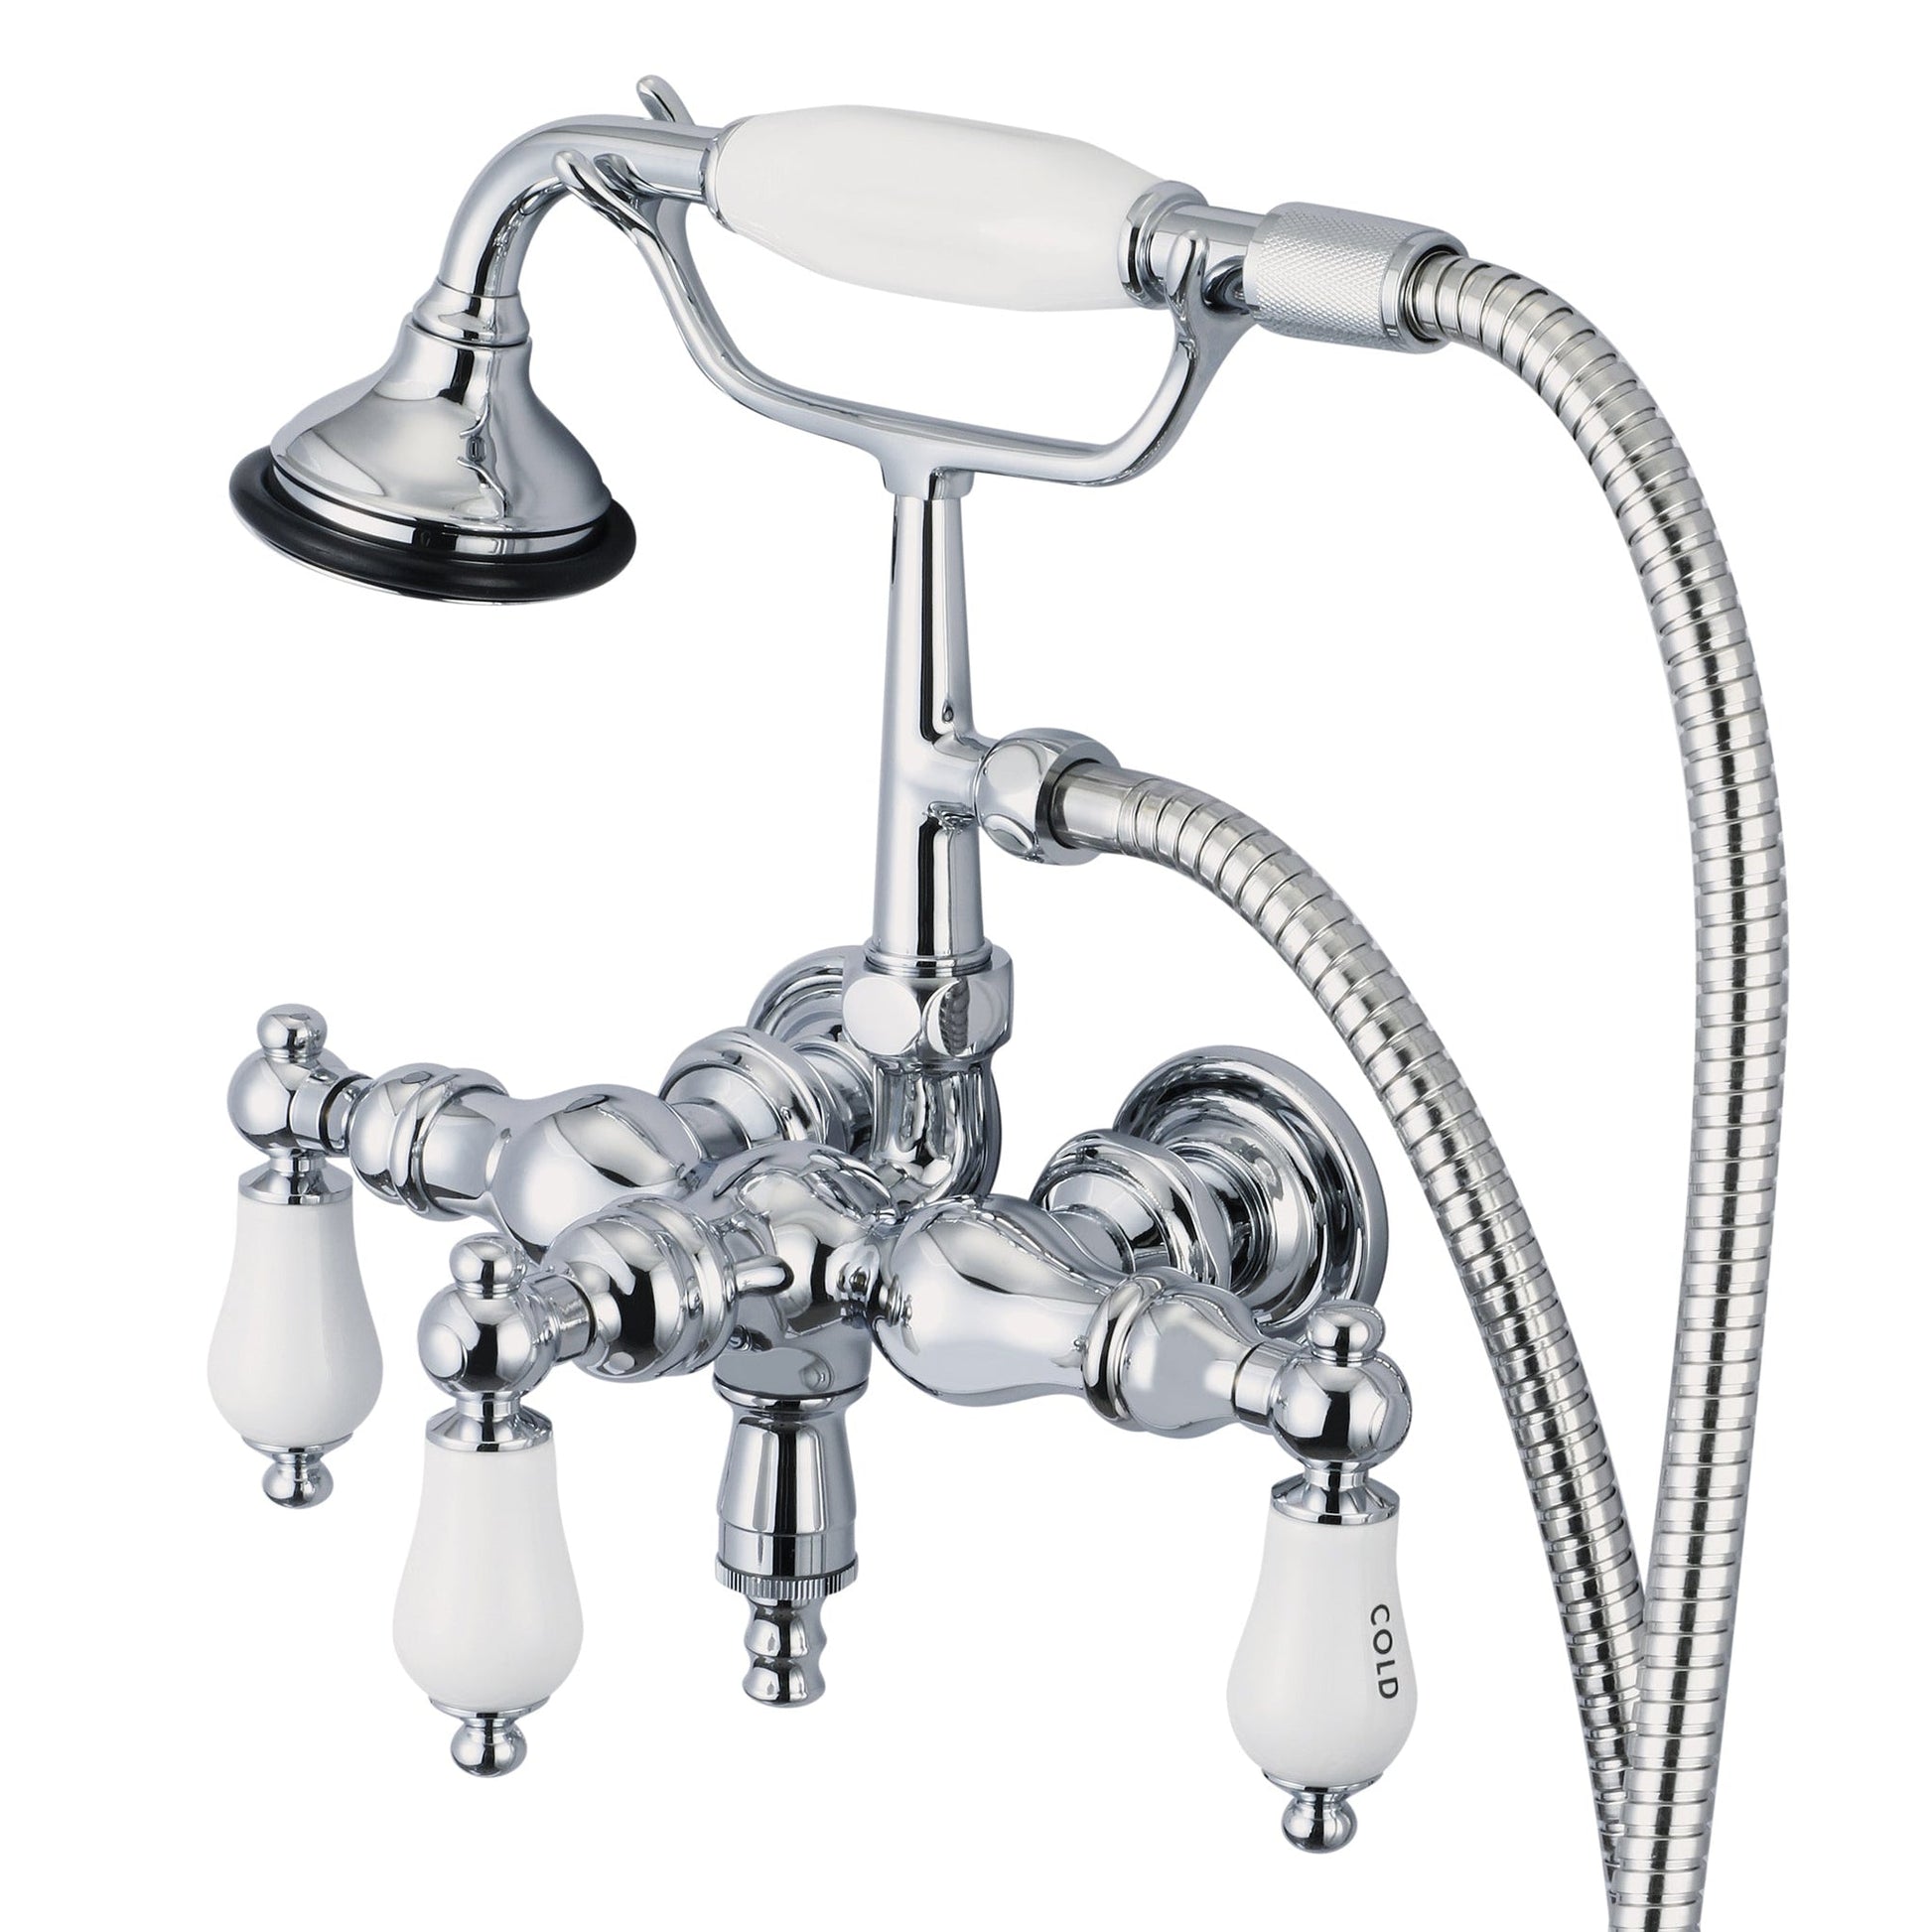 Water Creation Vintage Classic Center Wall Mount Tub F6-0017 9.25" Silver Solid Brass Faucet With Down Spout, Straight Wall Connector And Handheld Shower And Porcelain Lever Handles, Hot And Cold Labels Included